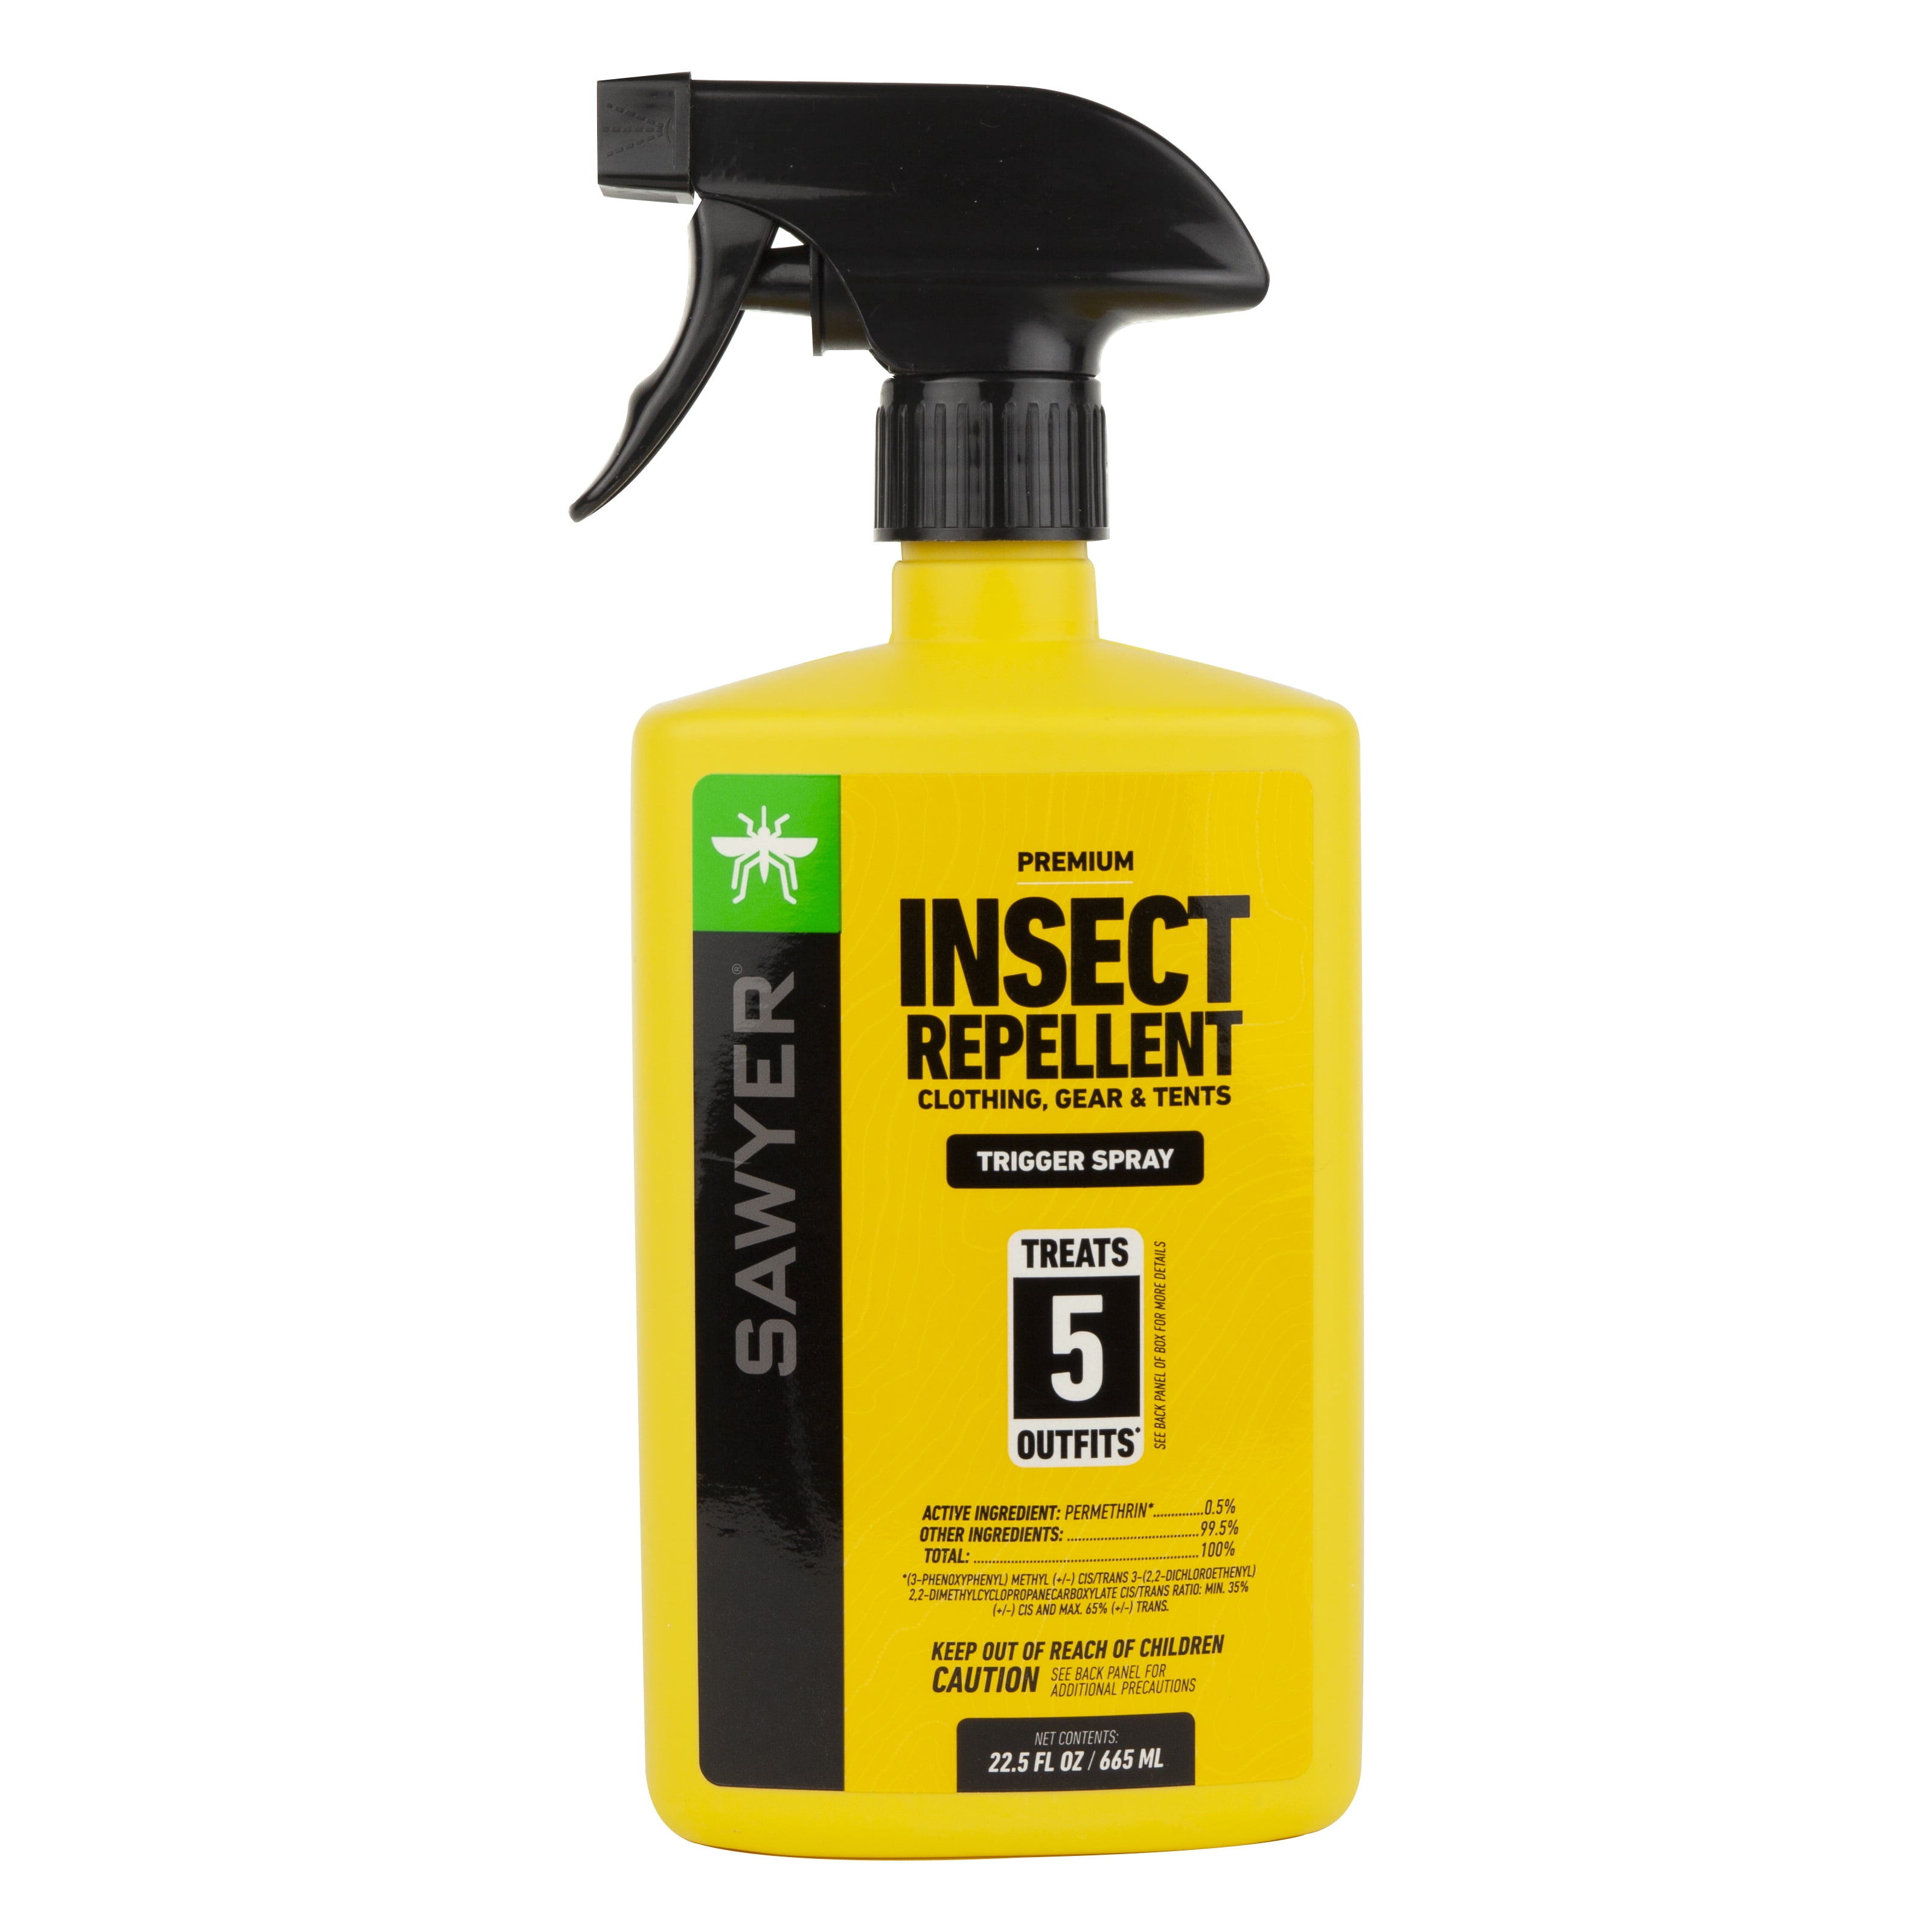 Sawyer Products SP656 Premium Permethrin Clothing and Gear Insect Repellent Trigger Spray, 22.5-Oz